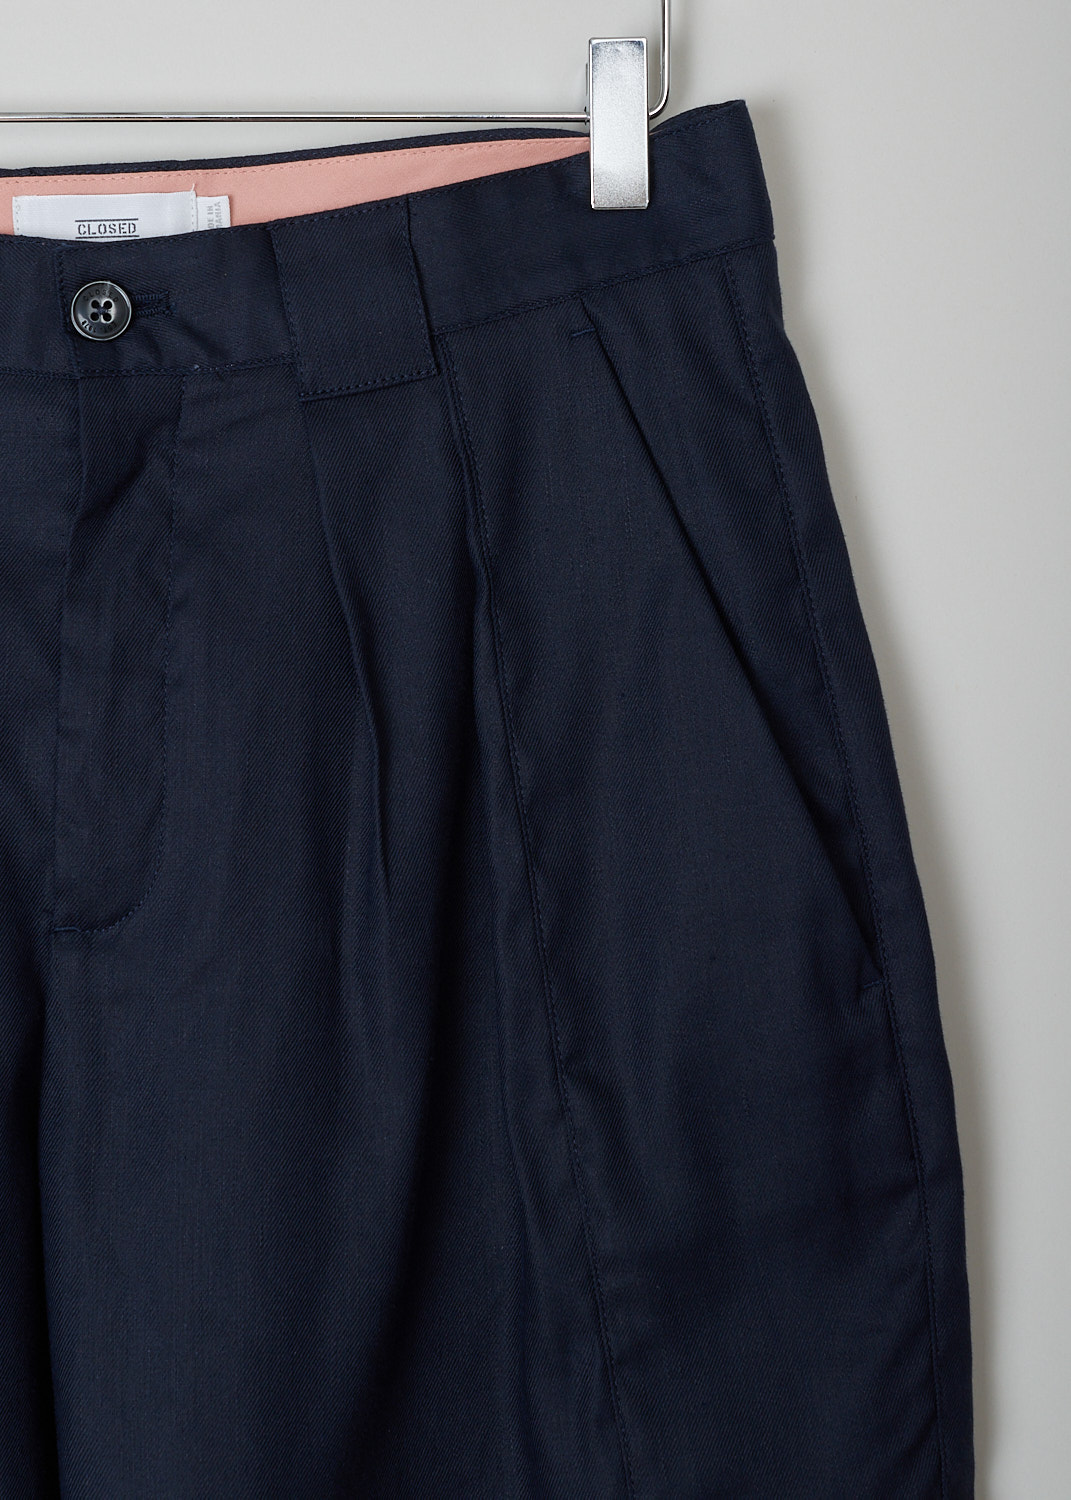 CLOSED, NAVY BLUE LINEN SHORTS, JOON_C92051_32L_22_561, Blue, Detail, These high-waisted navy blue linen shorts have a waistband with belt loops and a button and zipper closure. Subtle knife pleats decorate the front. These shorts have slanted pockets in the front and a single buttoned patch pocket in the back. 
